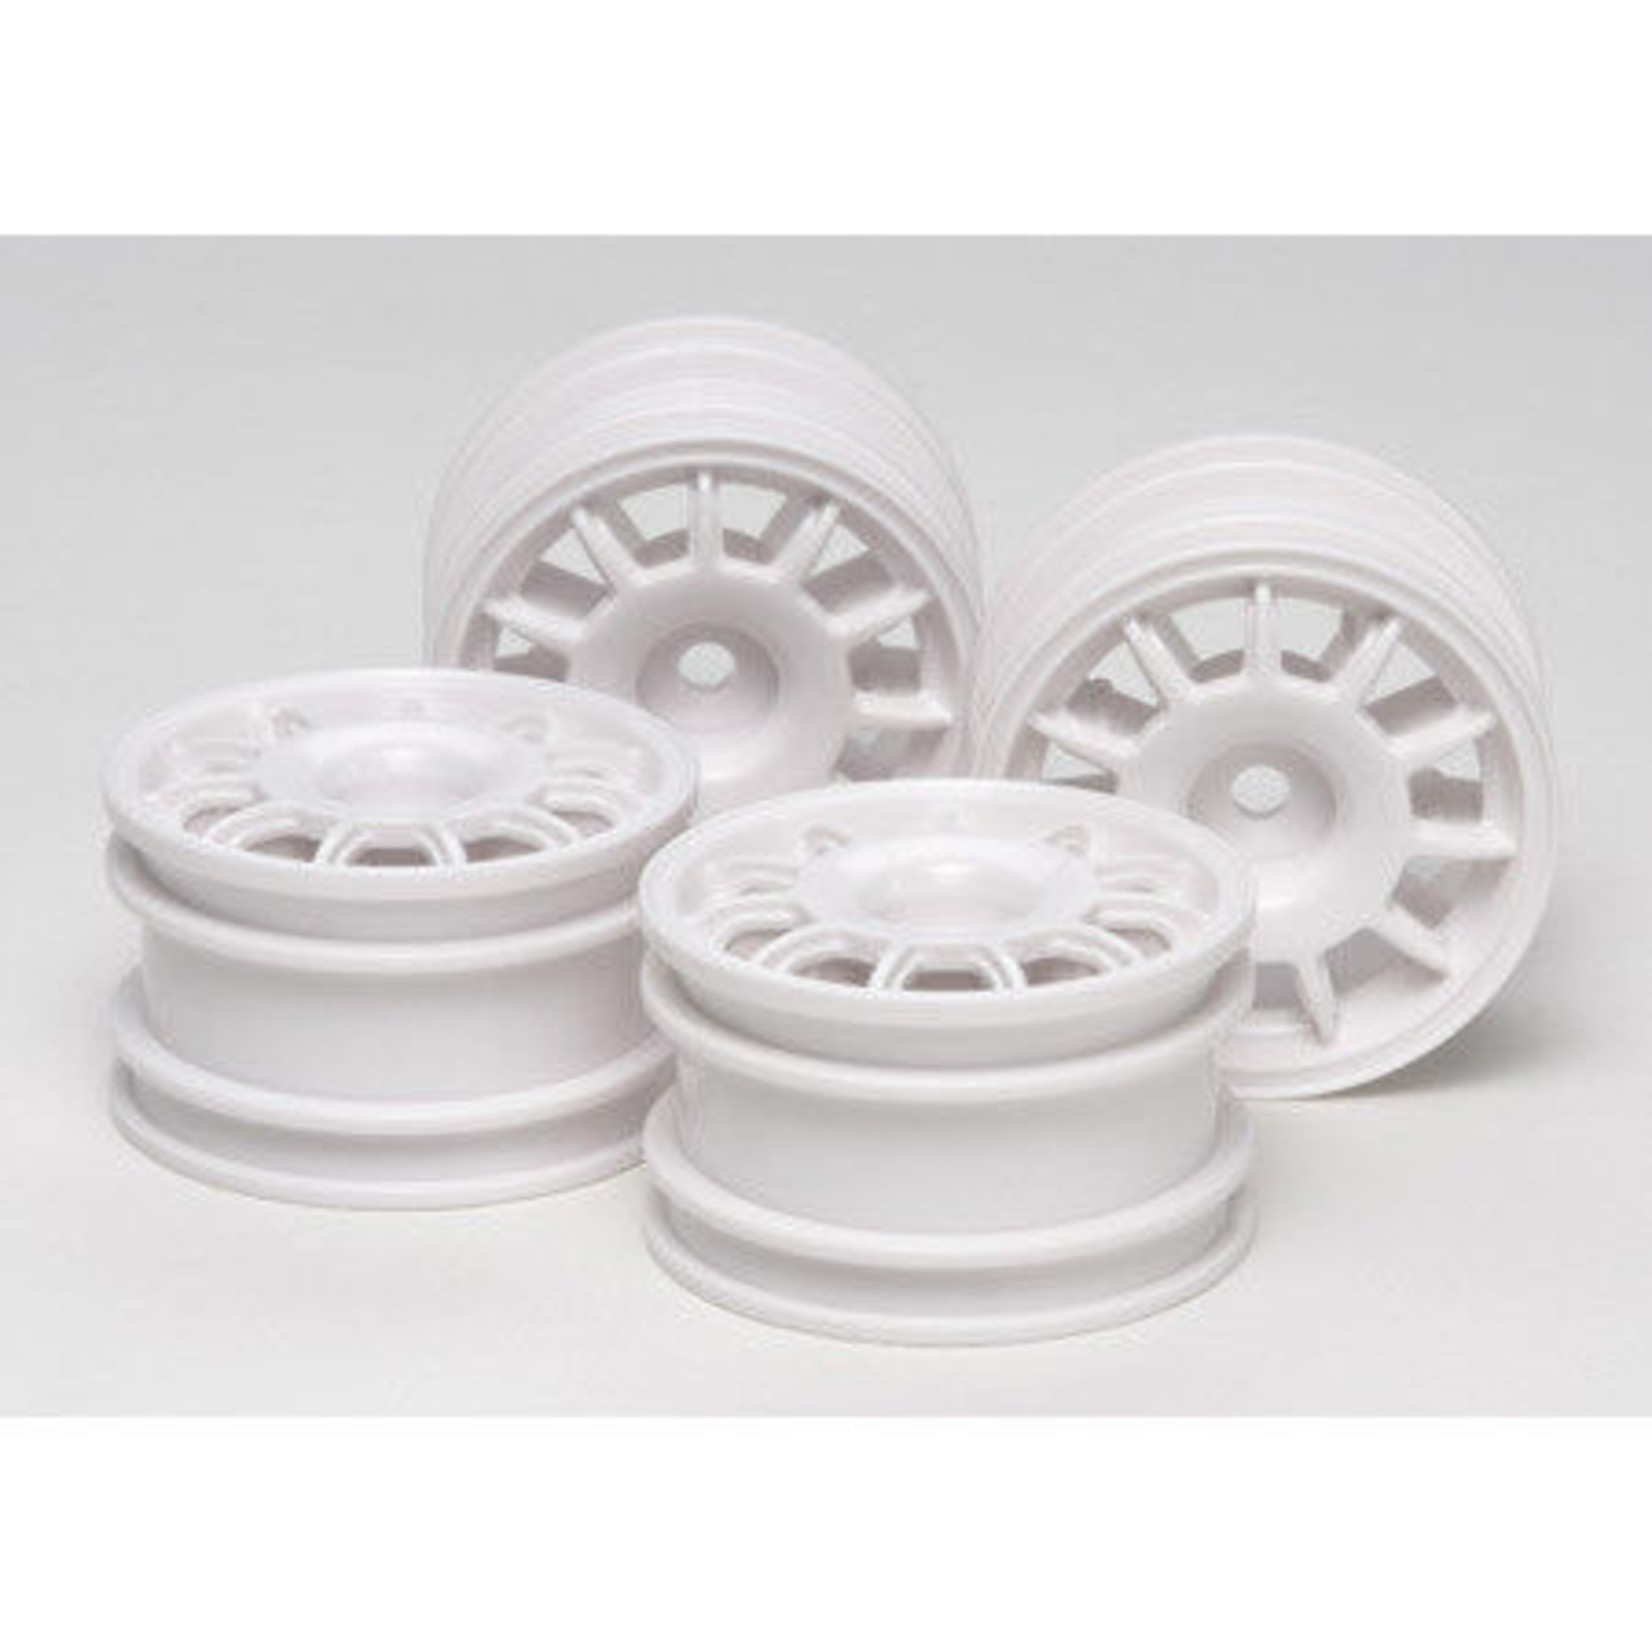 Tamiya 1/10 11-Spoke Front/Rear Racing Wheels 12mm Hex, White (4): M-Chassis